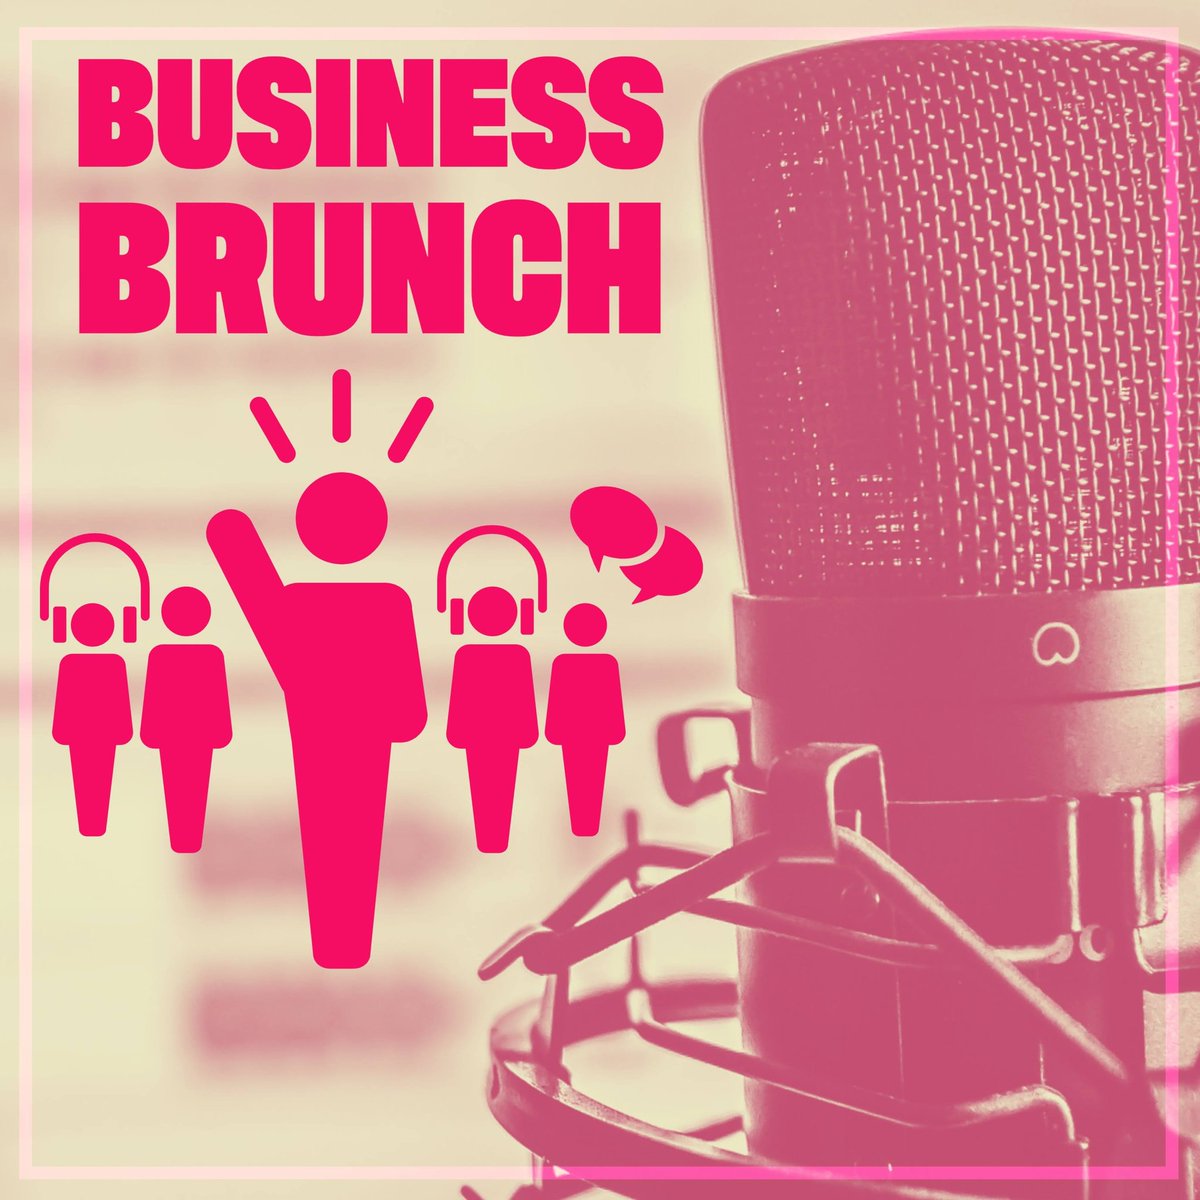 We're building up a tidy line up for our first episodes...some inspiring stories, coming soon 👀
#podcast #businessbrunch #comingsoon #motivation 
Powered by @ThePodcastRadio 🎙️